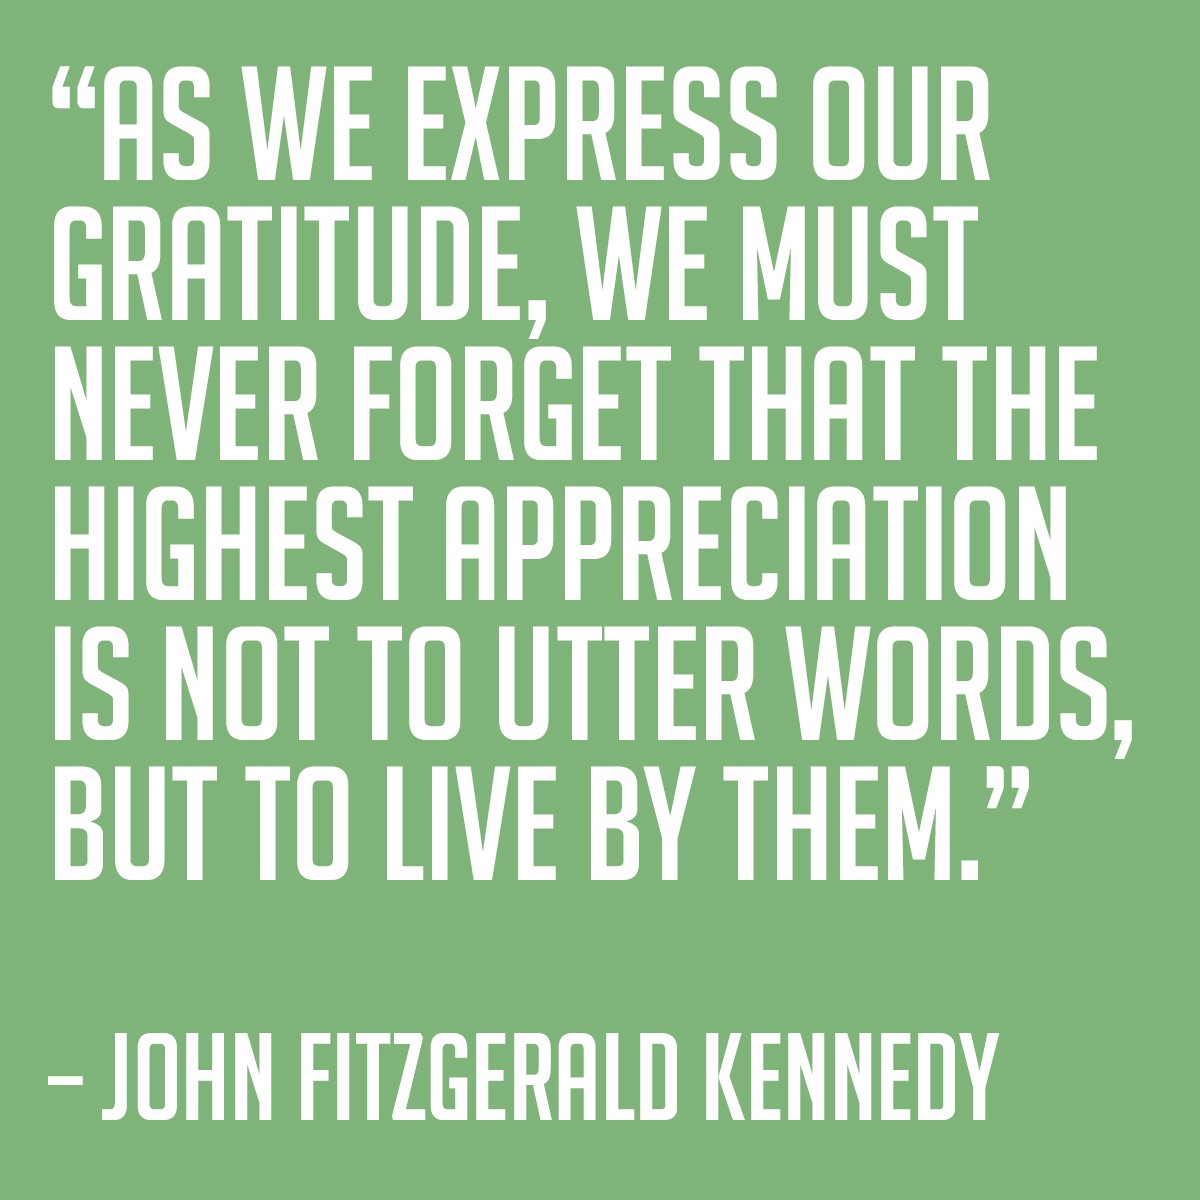 As we express our gratitude, we must never forget that the highest appreciation is not to utter words, but to live by them. - John Fitzgerald Kennedy | MakeItGrateful.com